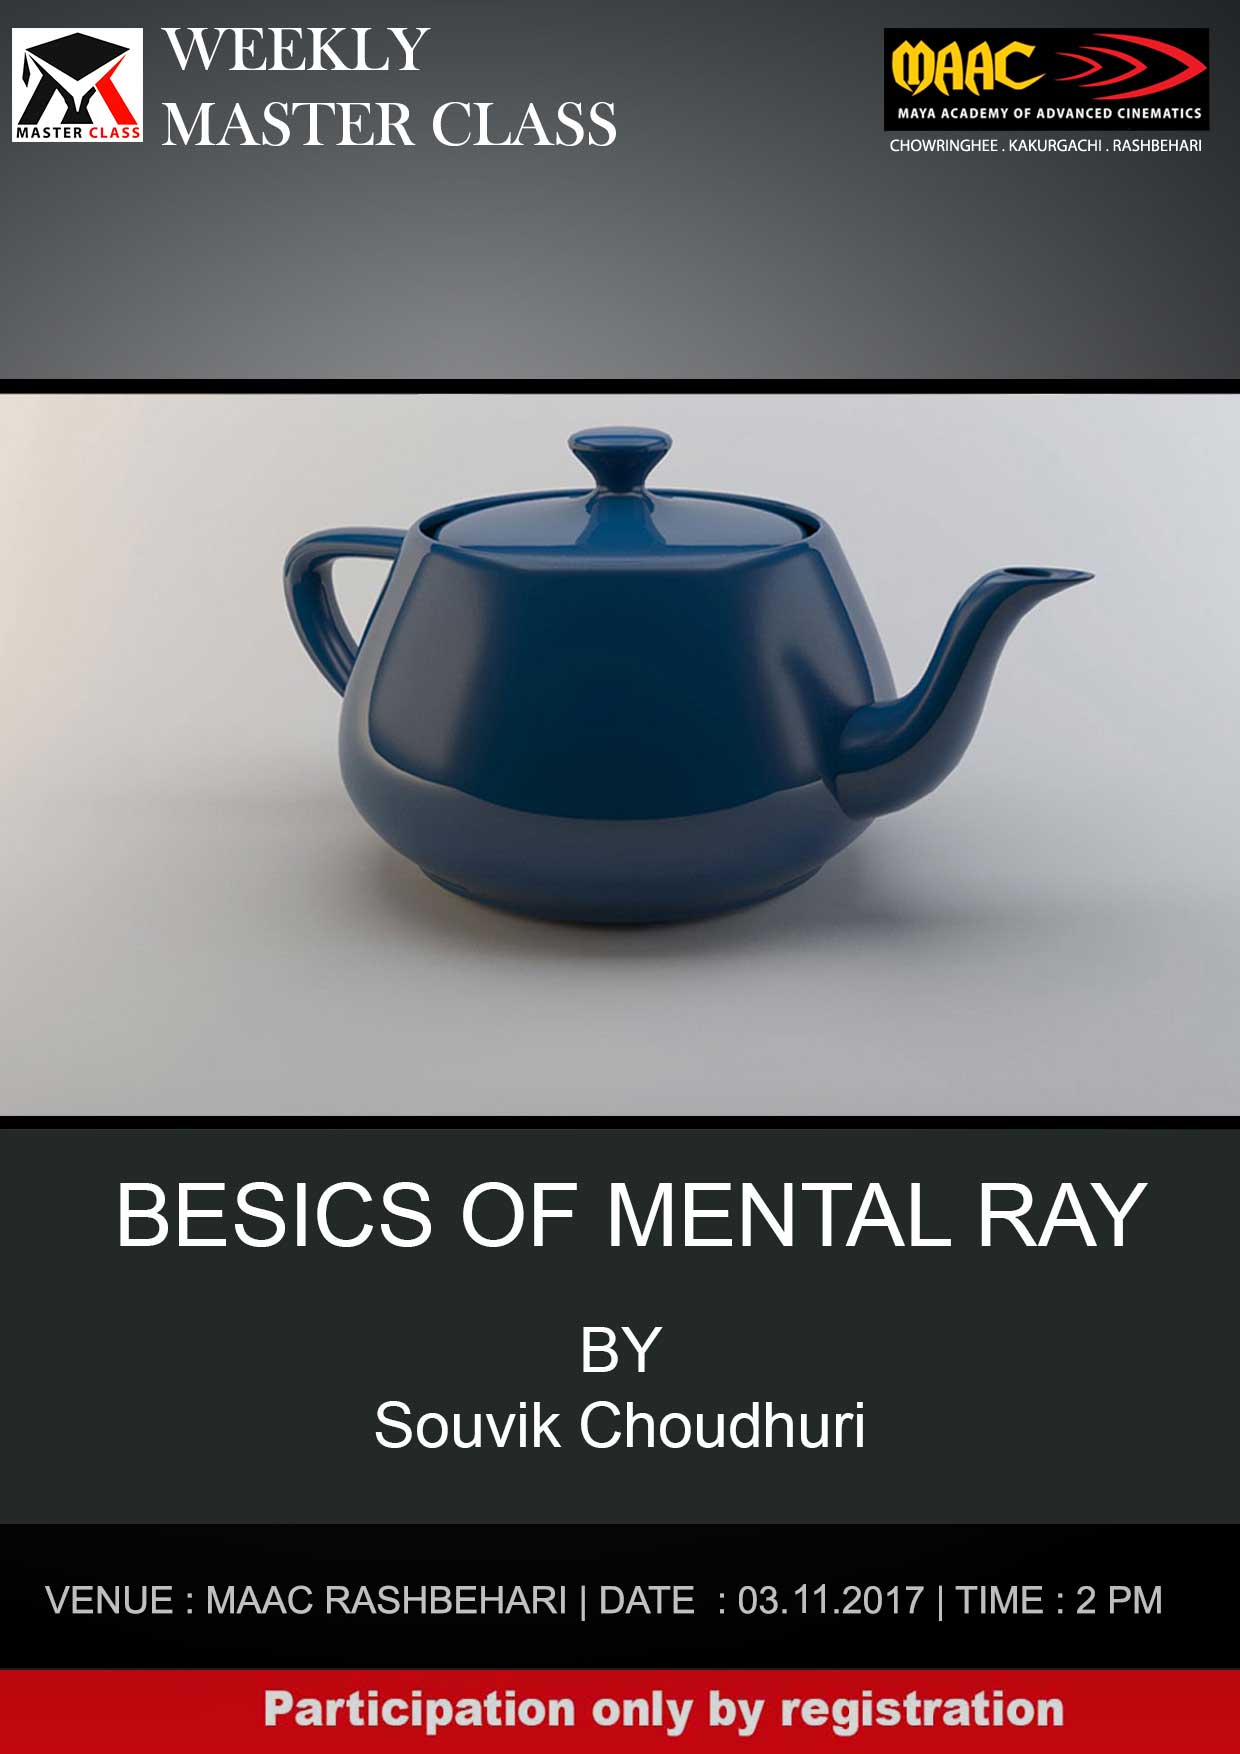 Weekly Master Class on Basics of Mental Ray